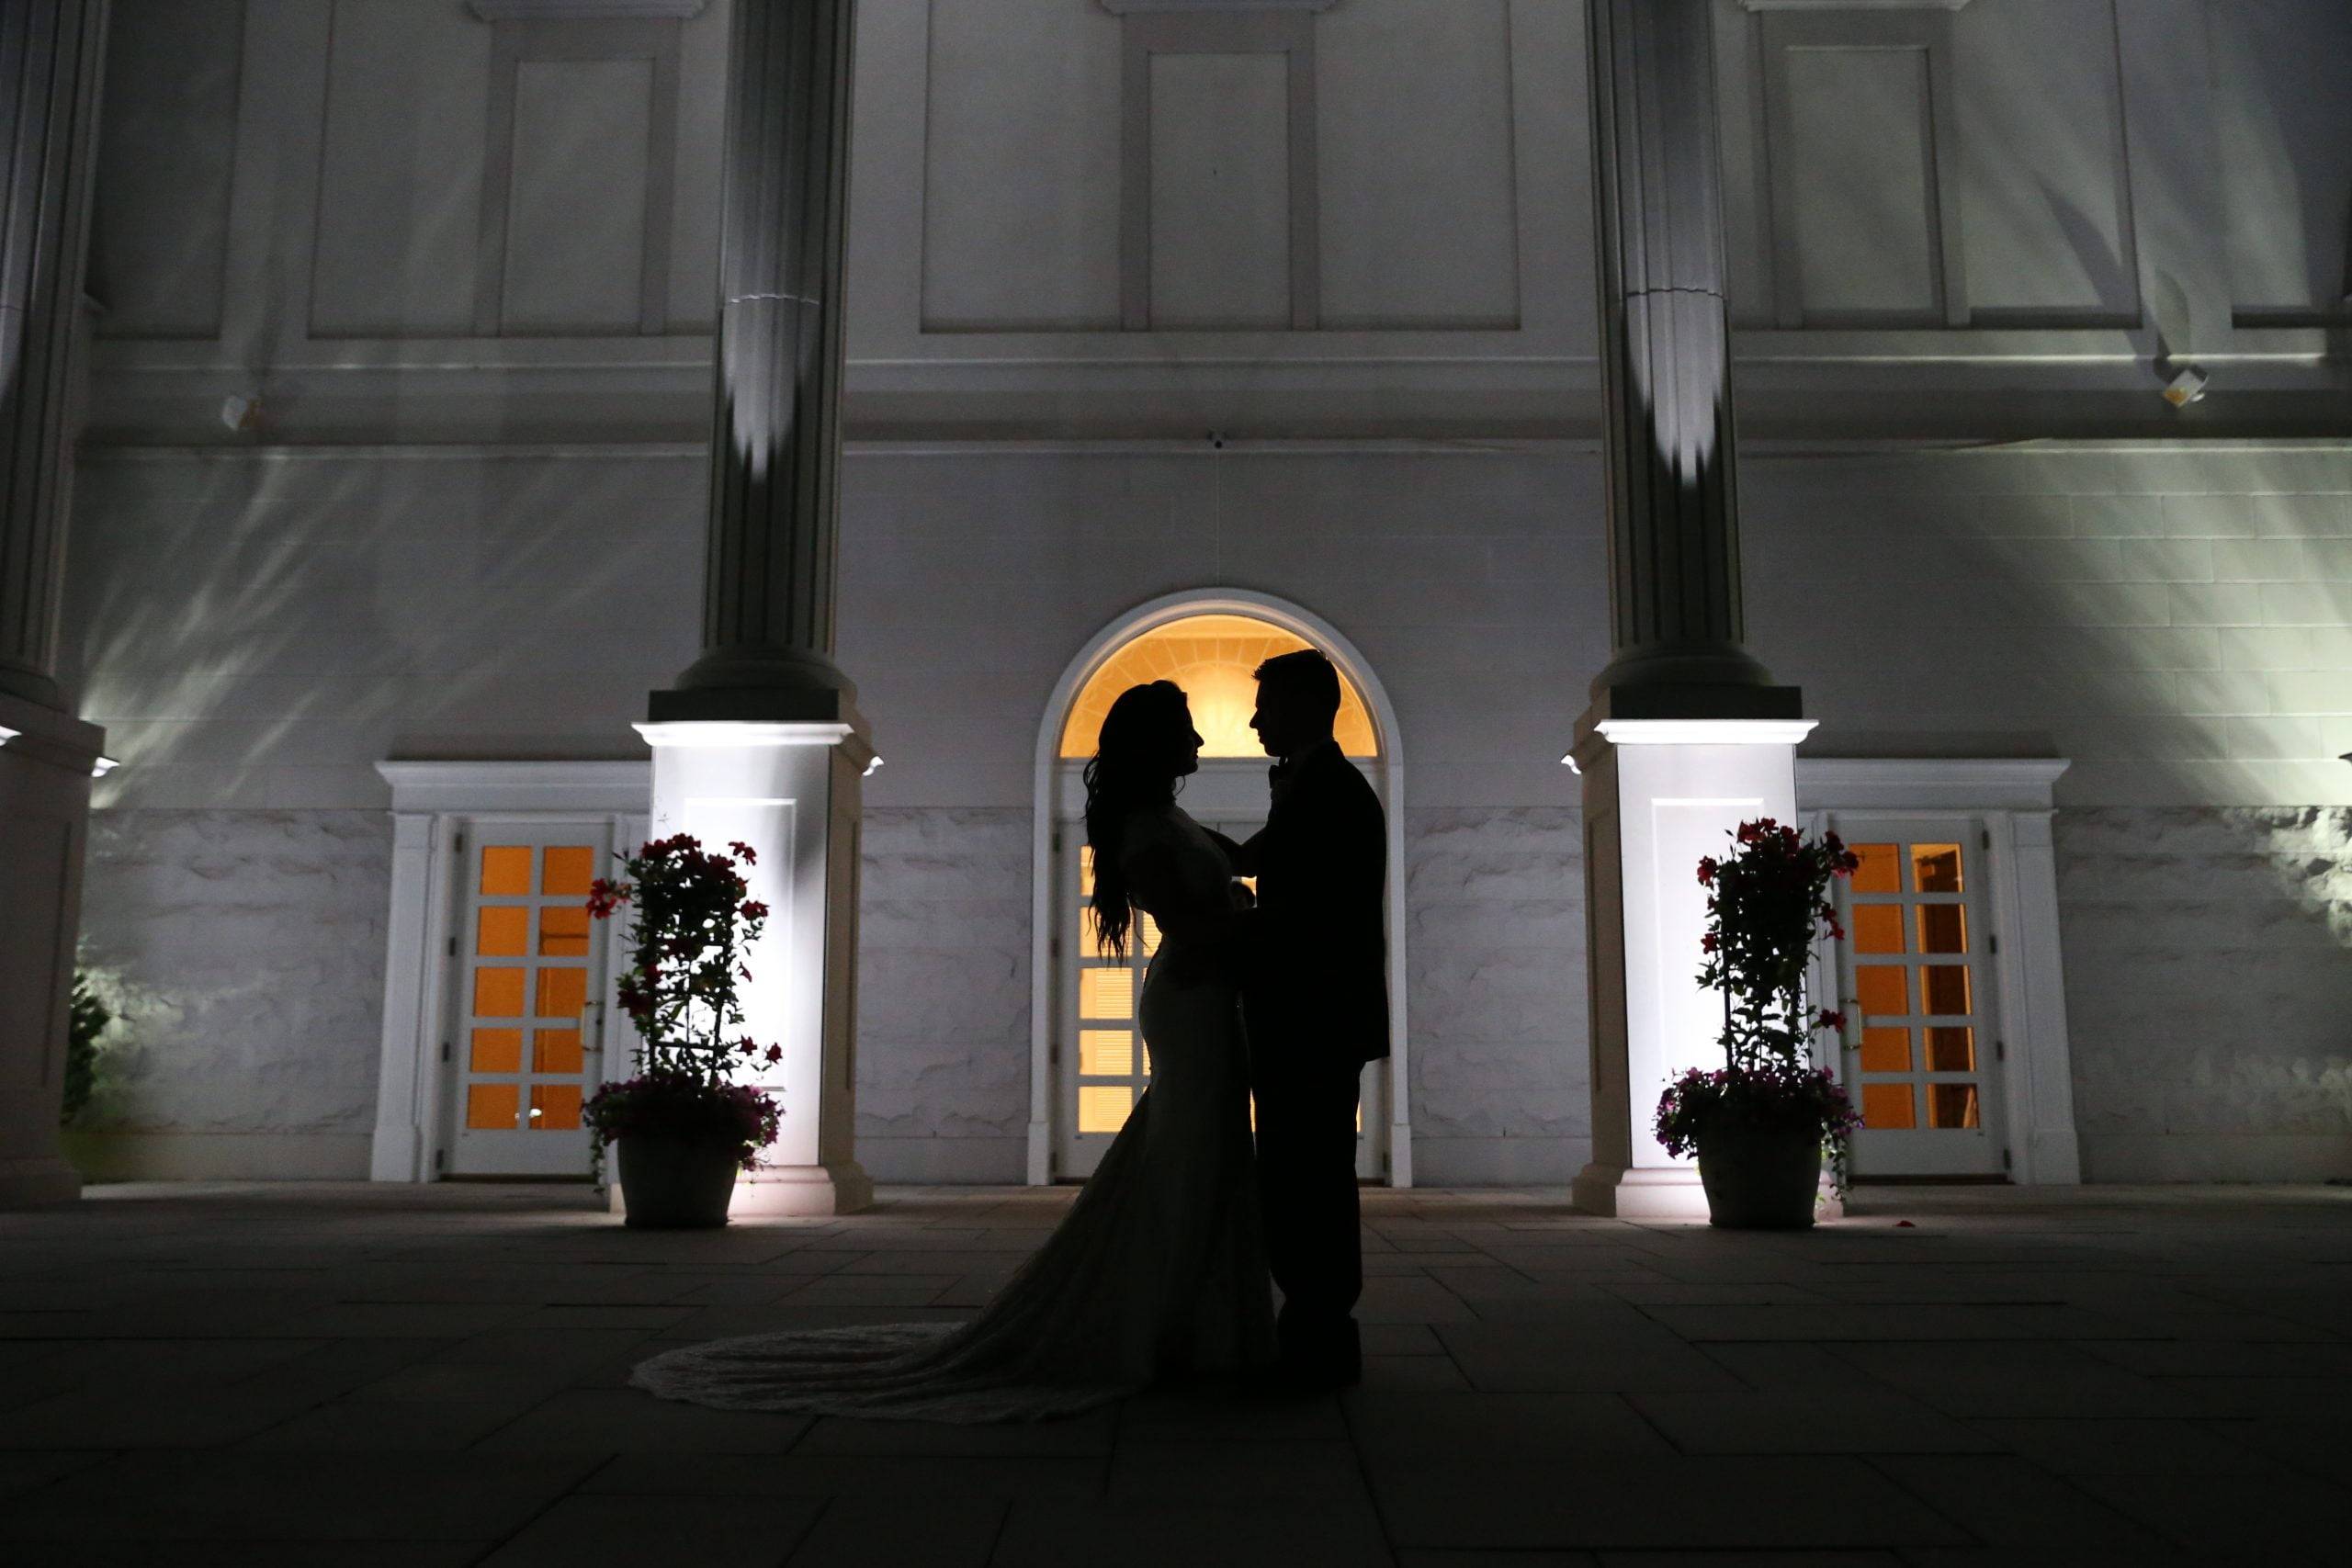 A bride and groom standing in front of a building at night.